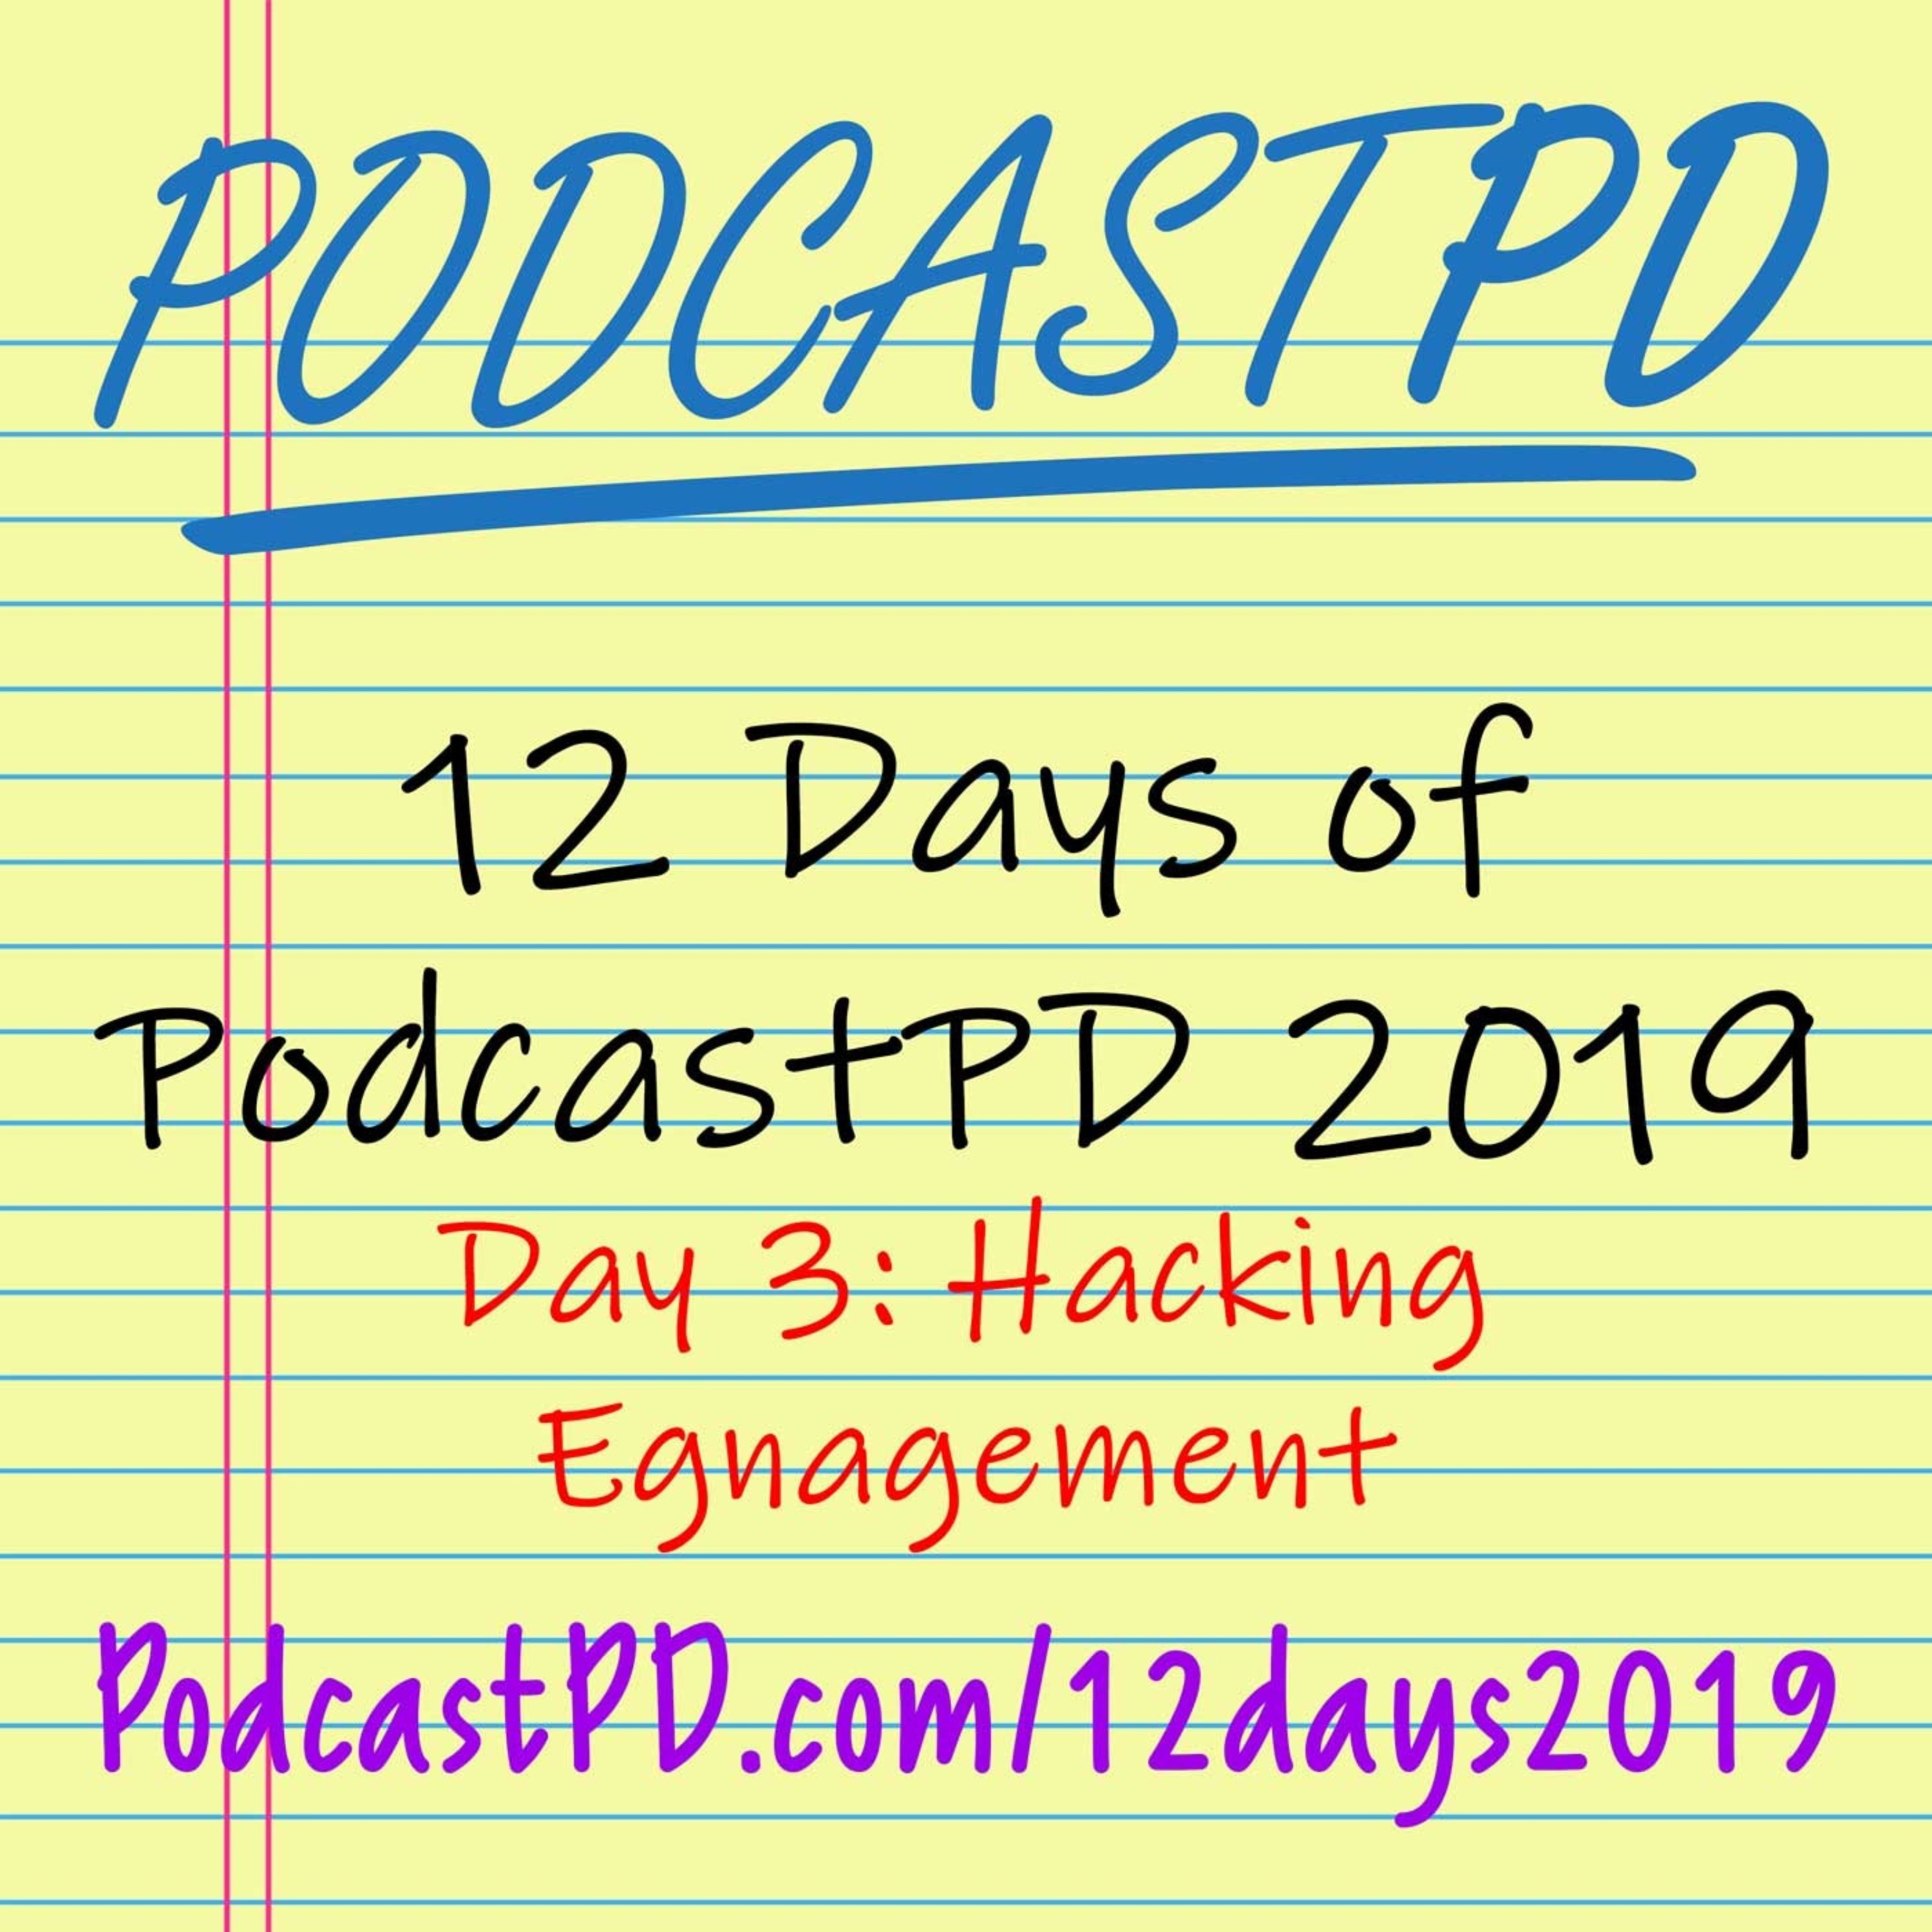 Hacking Engagement - 12 Days of PodcastPD 2019 Image